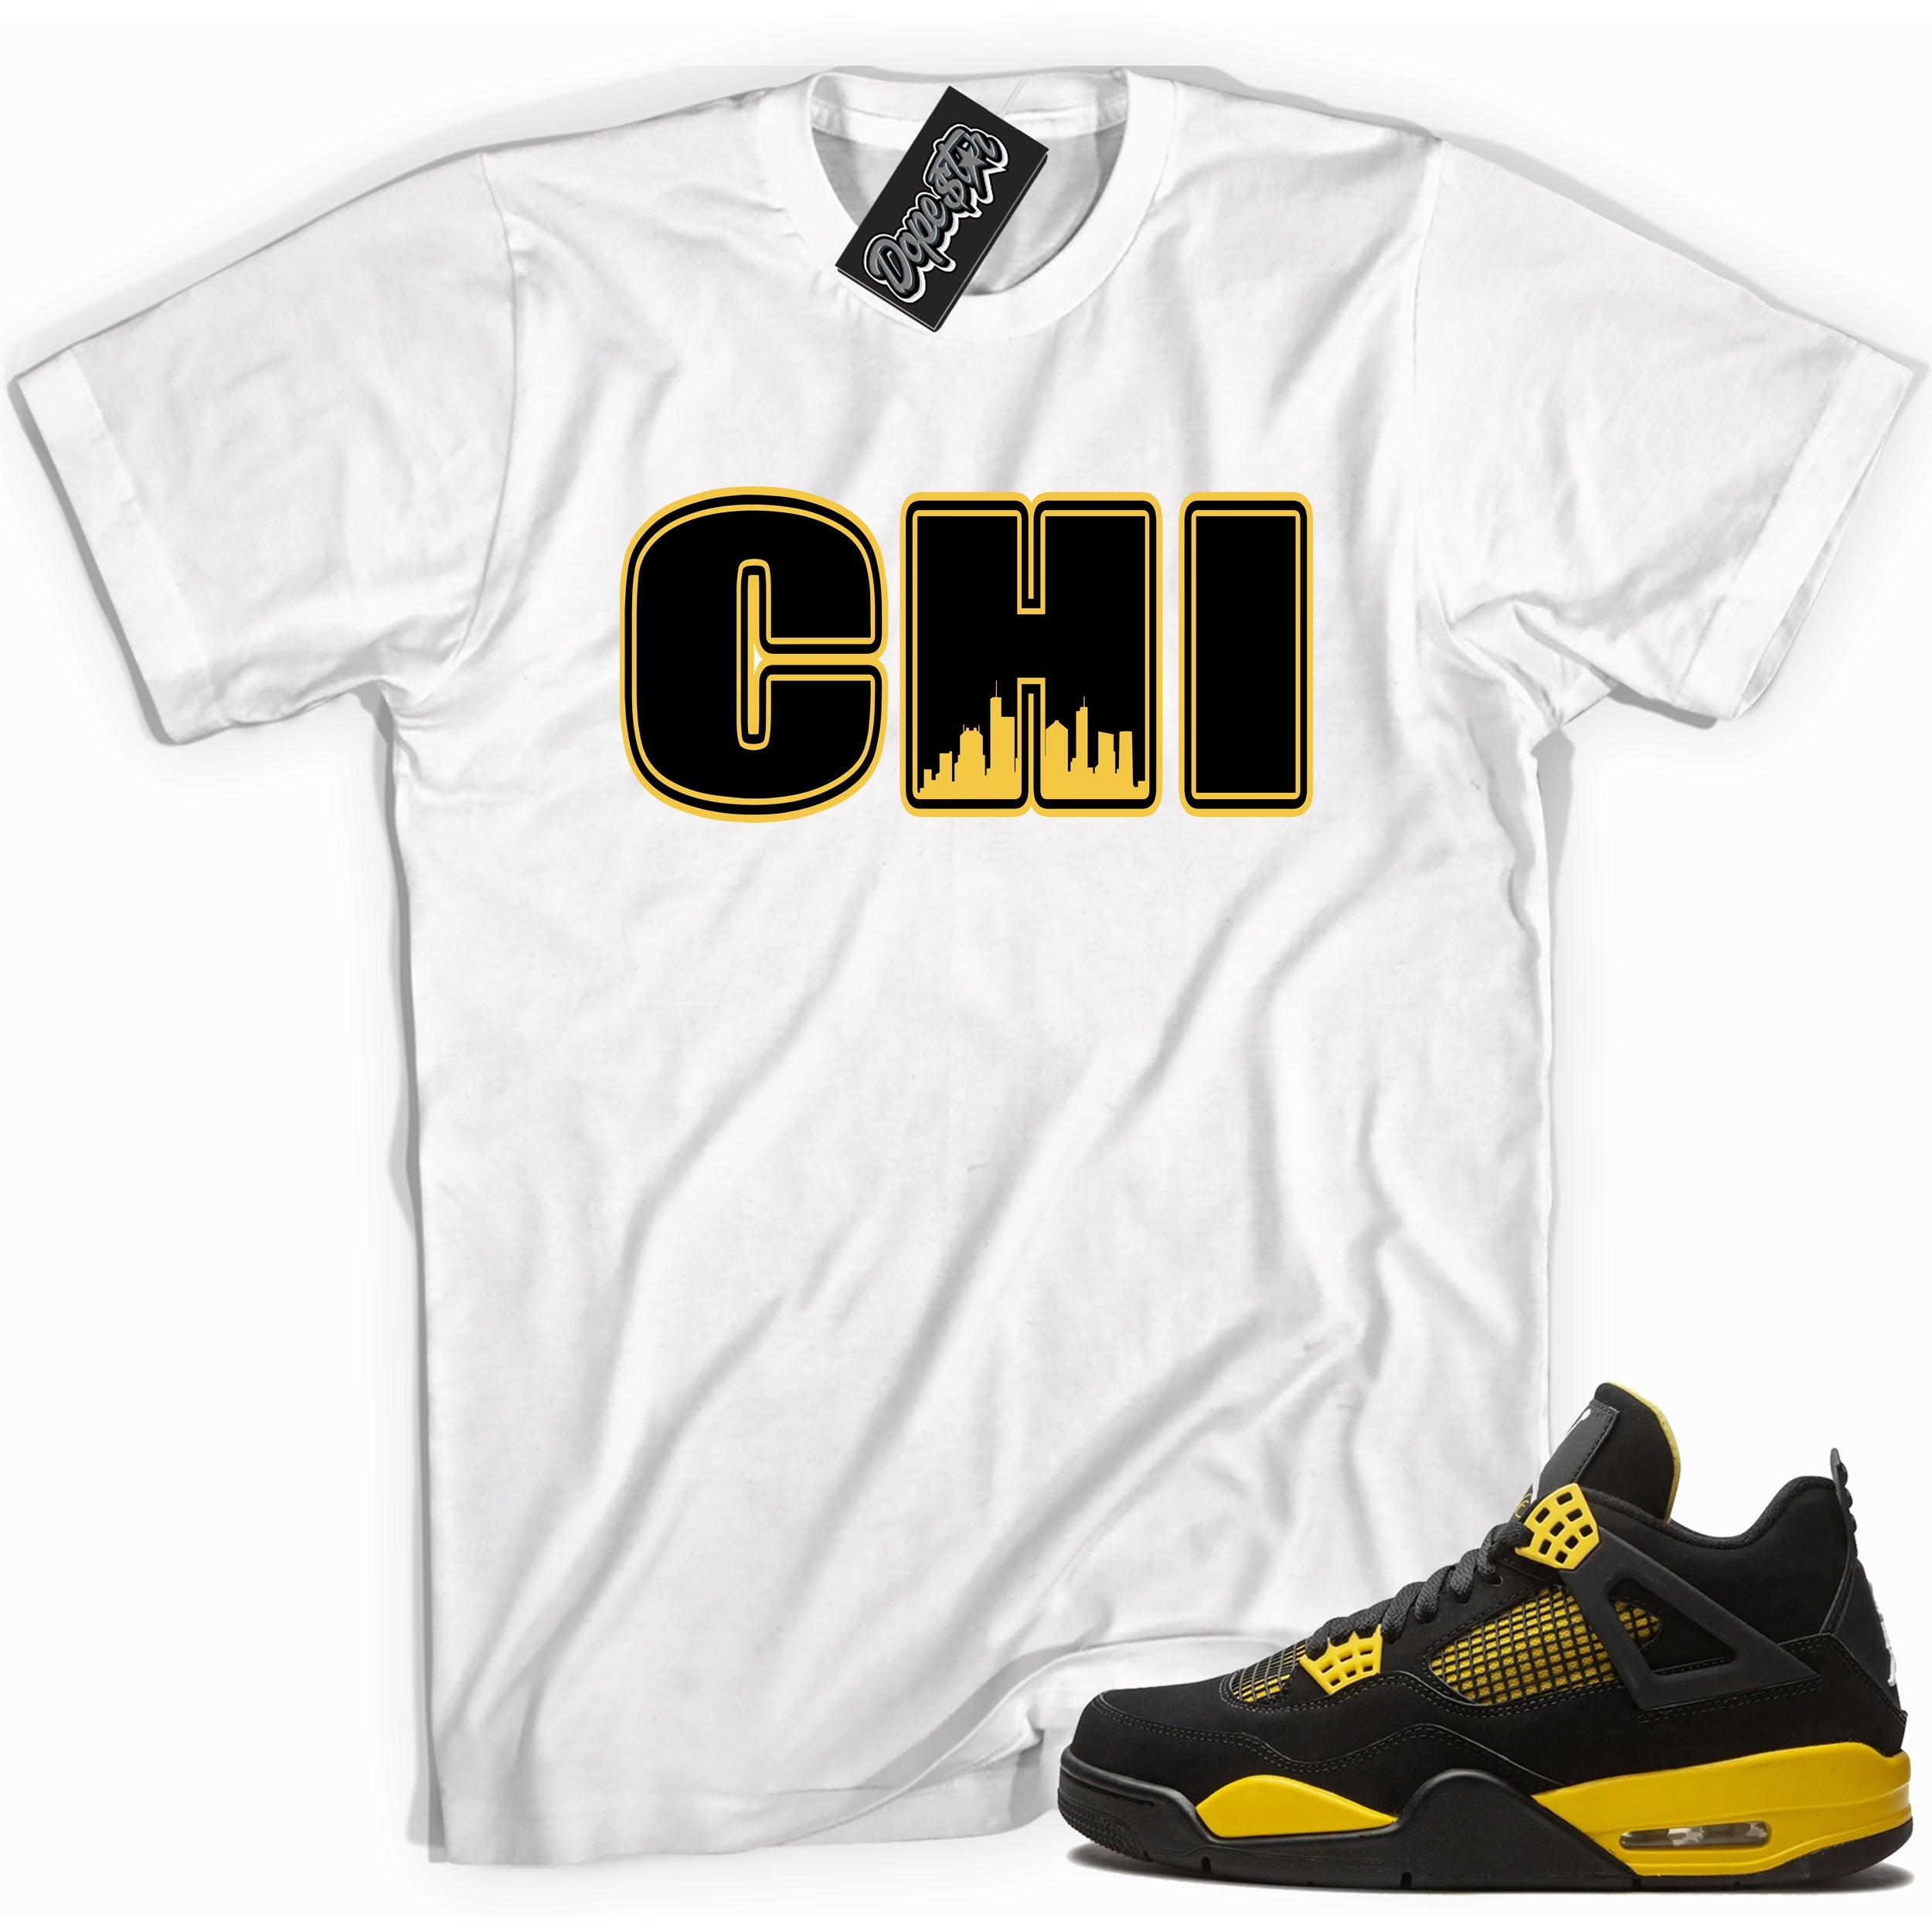 Cool white graphic tee with 'chicago' print, that perfectly matches Air Jordan 4 Thunder sneakers